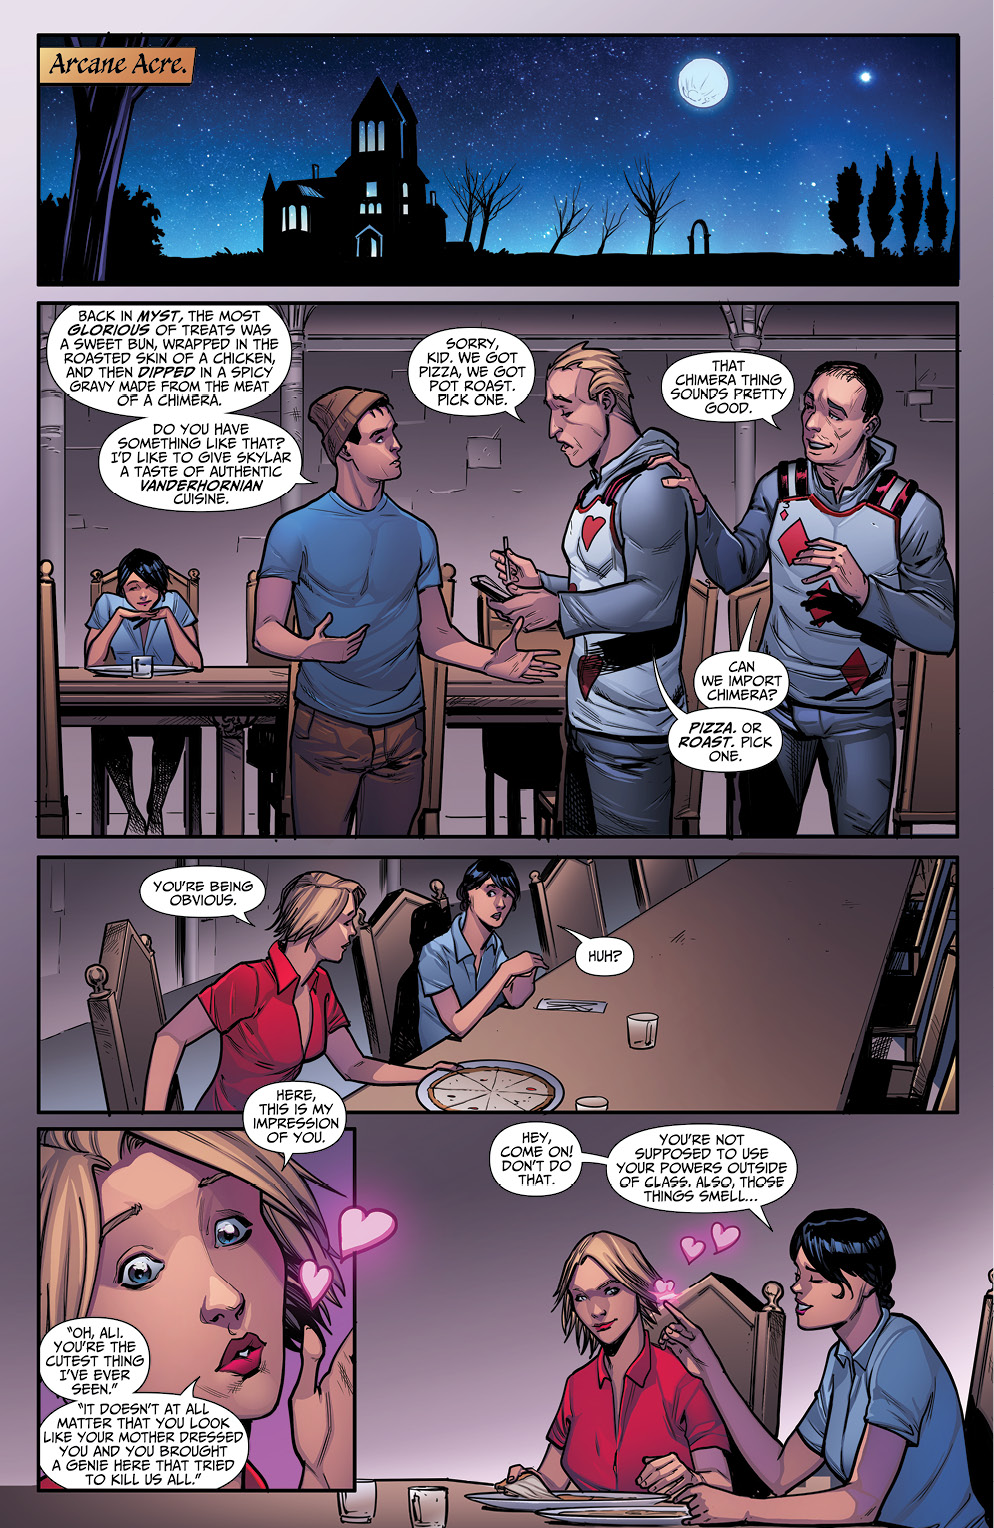 GFT107_page 4